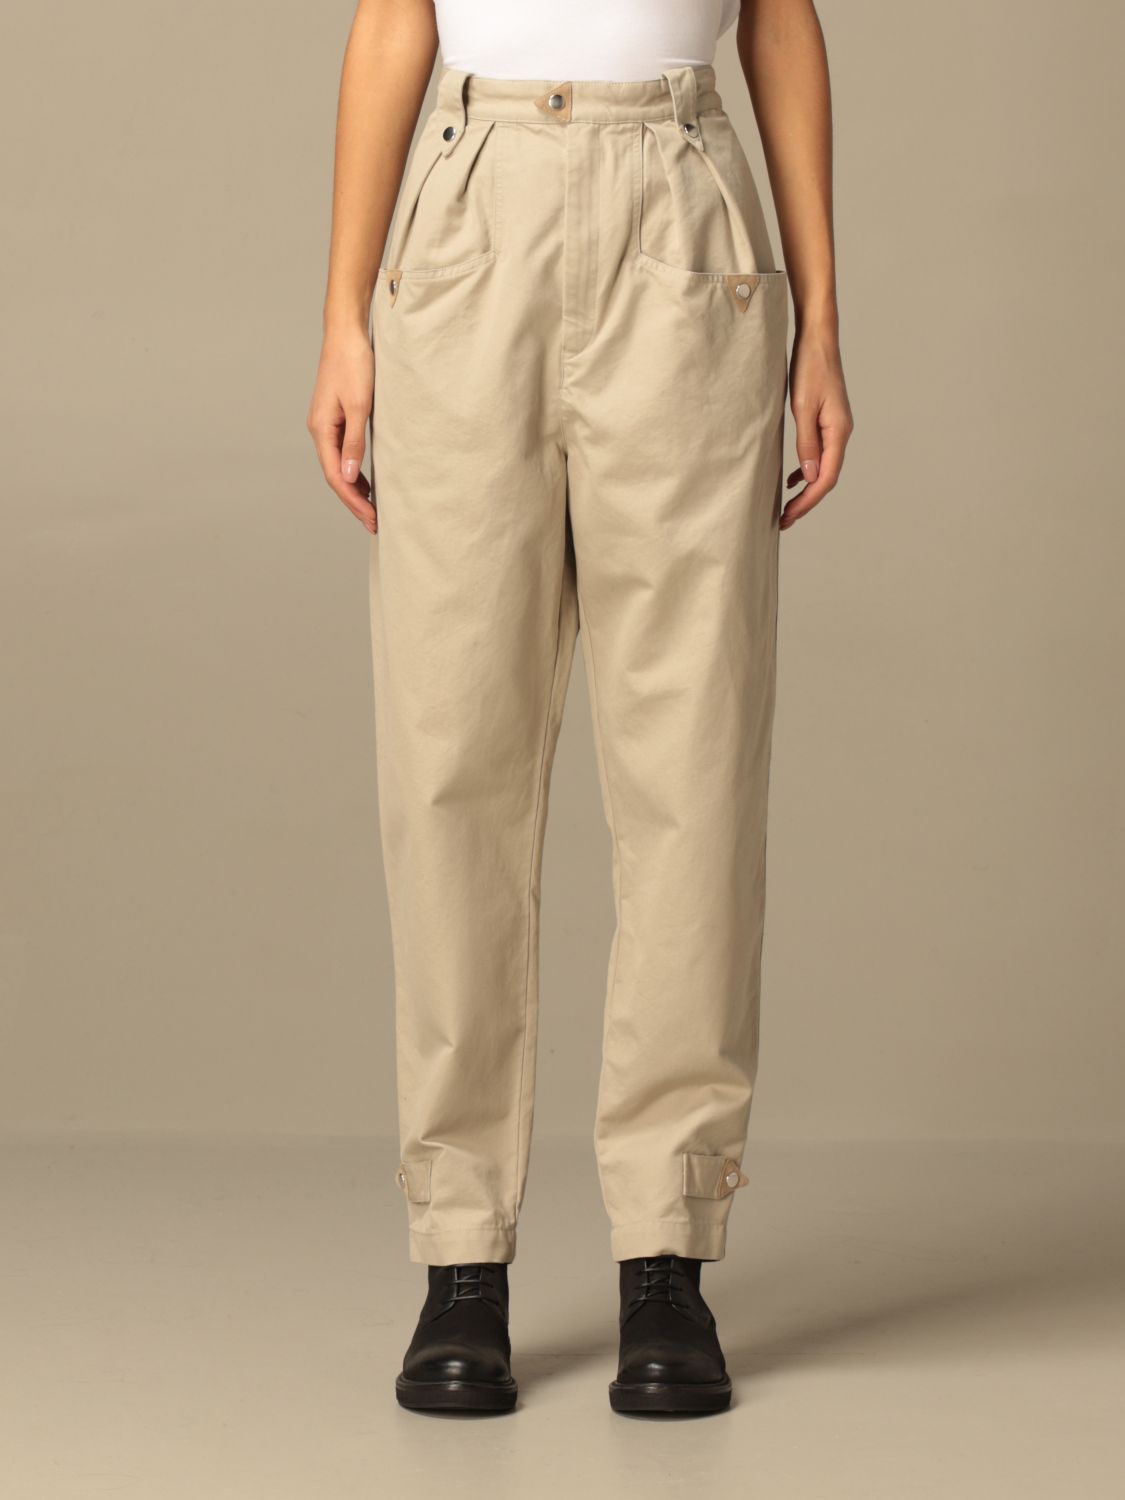 Isabel Marant Outlet: high-waisted trousers - Beige | Isabel pants PA170820A030E online at GIGLIO.COM